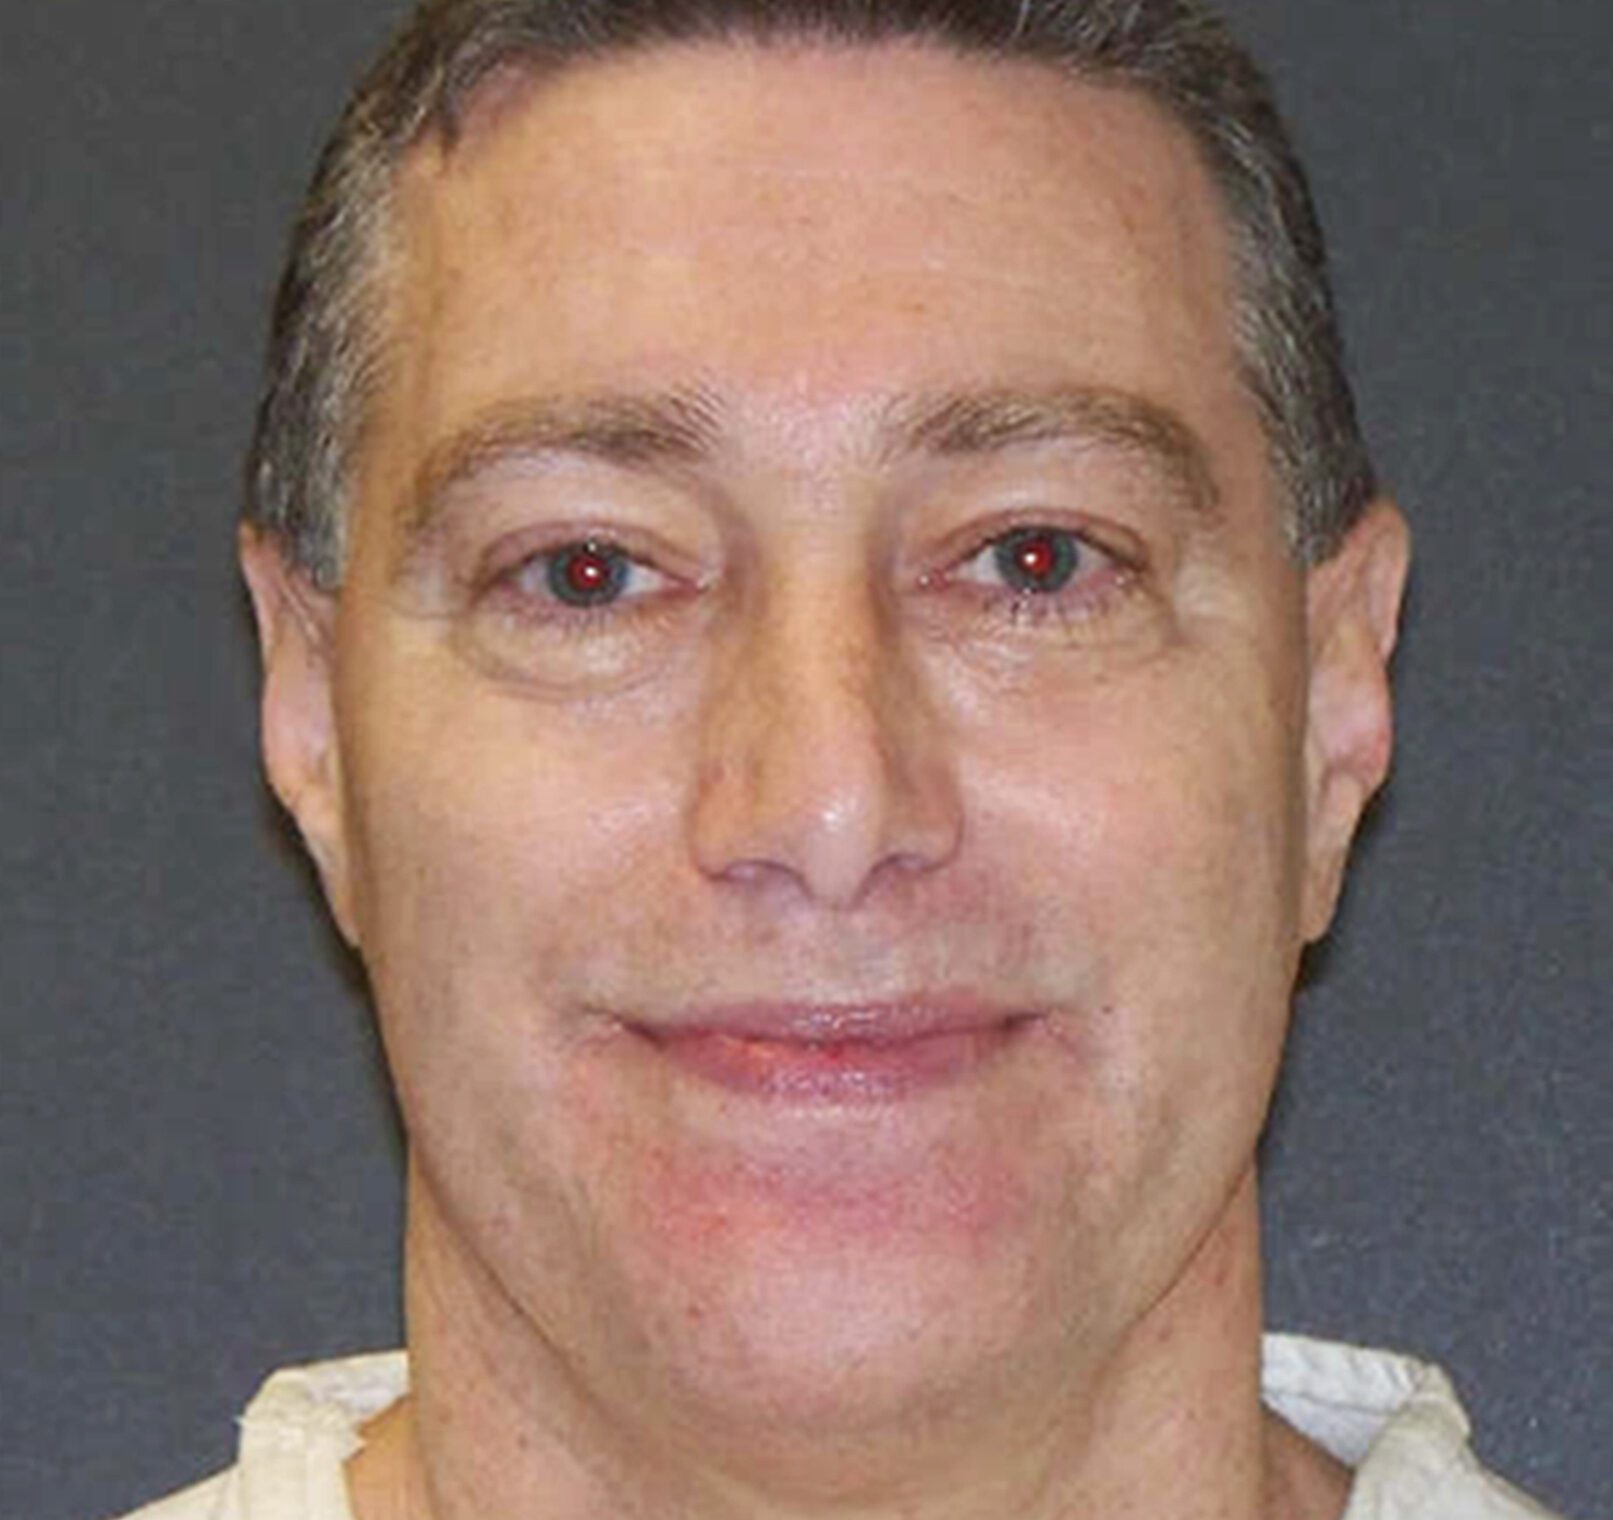 FILE - This booking photo provided by the Texas Department of Criminal Justice shows Robert Fratta, a former suburban Houston police officer on death row. Fratta was set to be executed on Tuesday, Jan. 10, 2023, for hiring two people to kill his estranged wife nearly 30 years ago. (Texas Department of Criminal Justice via AP, File)